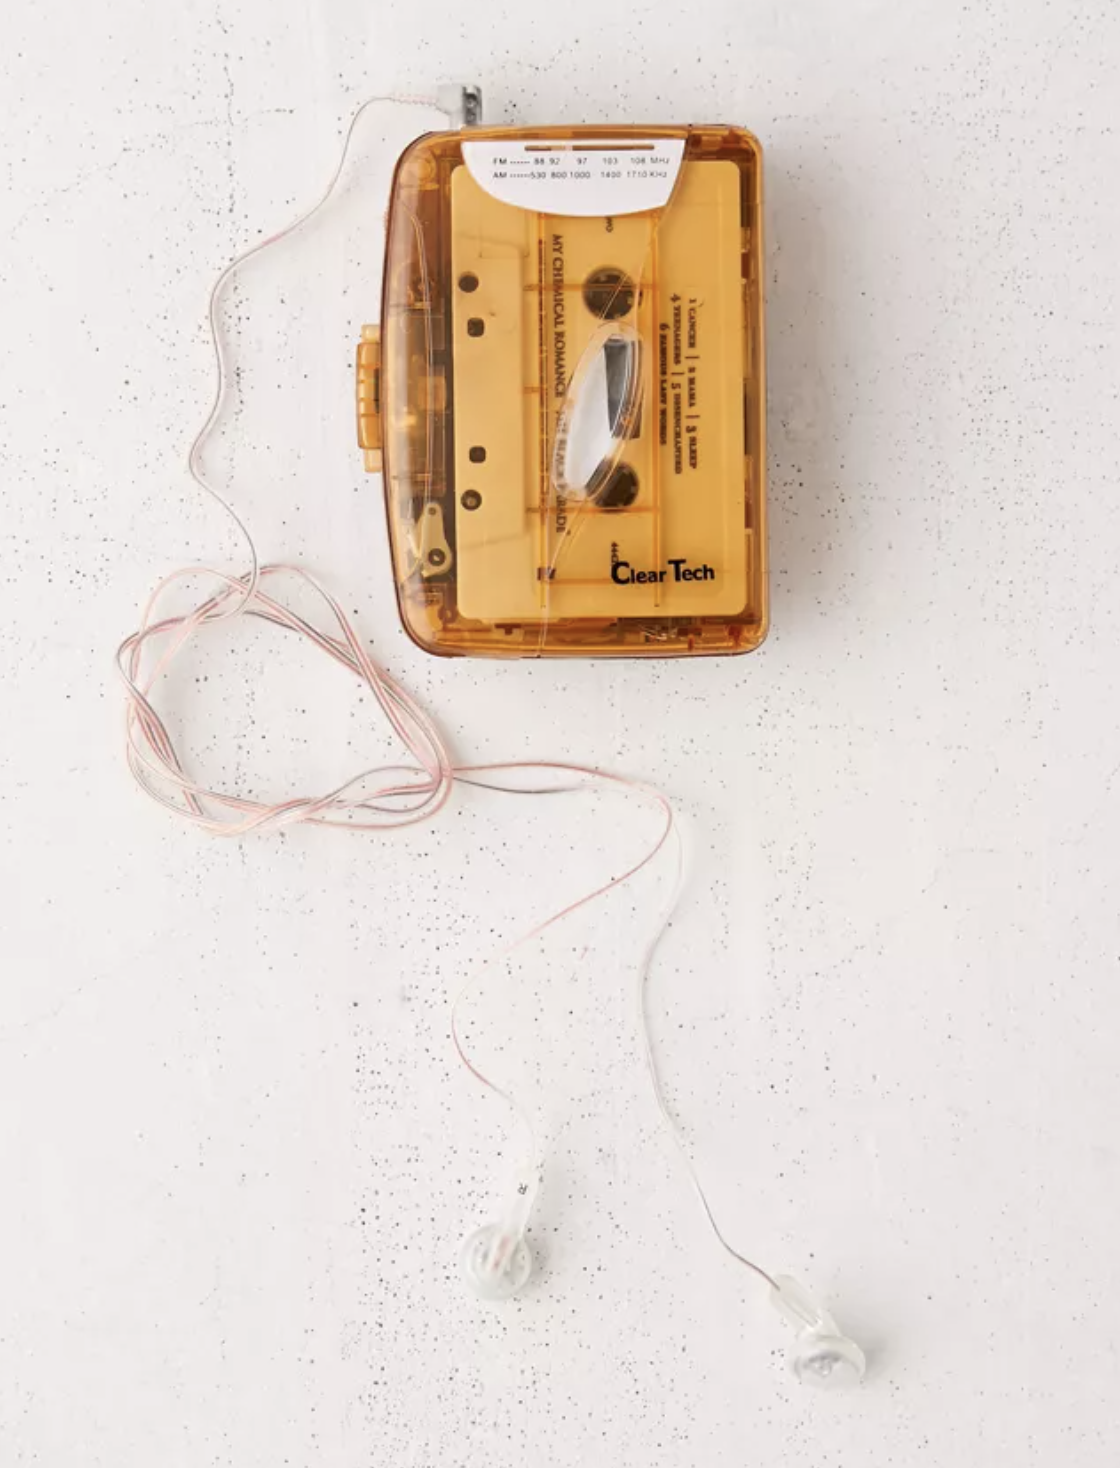 A cassette player with earbuds on a plain background